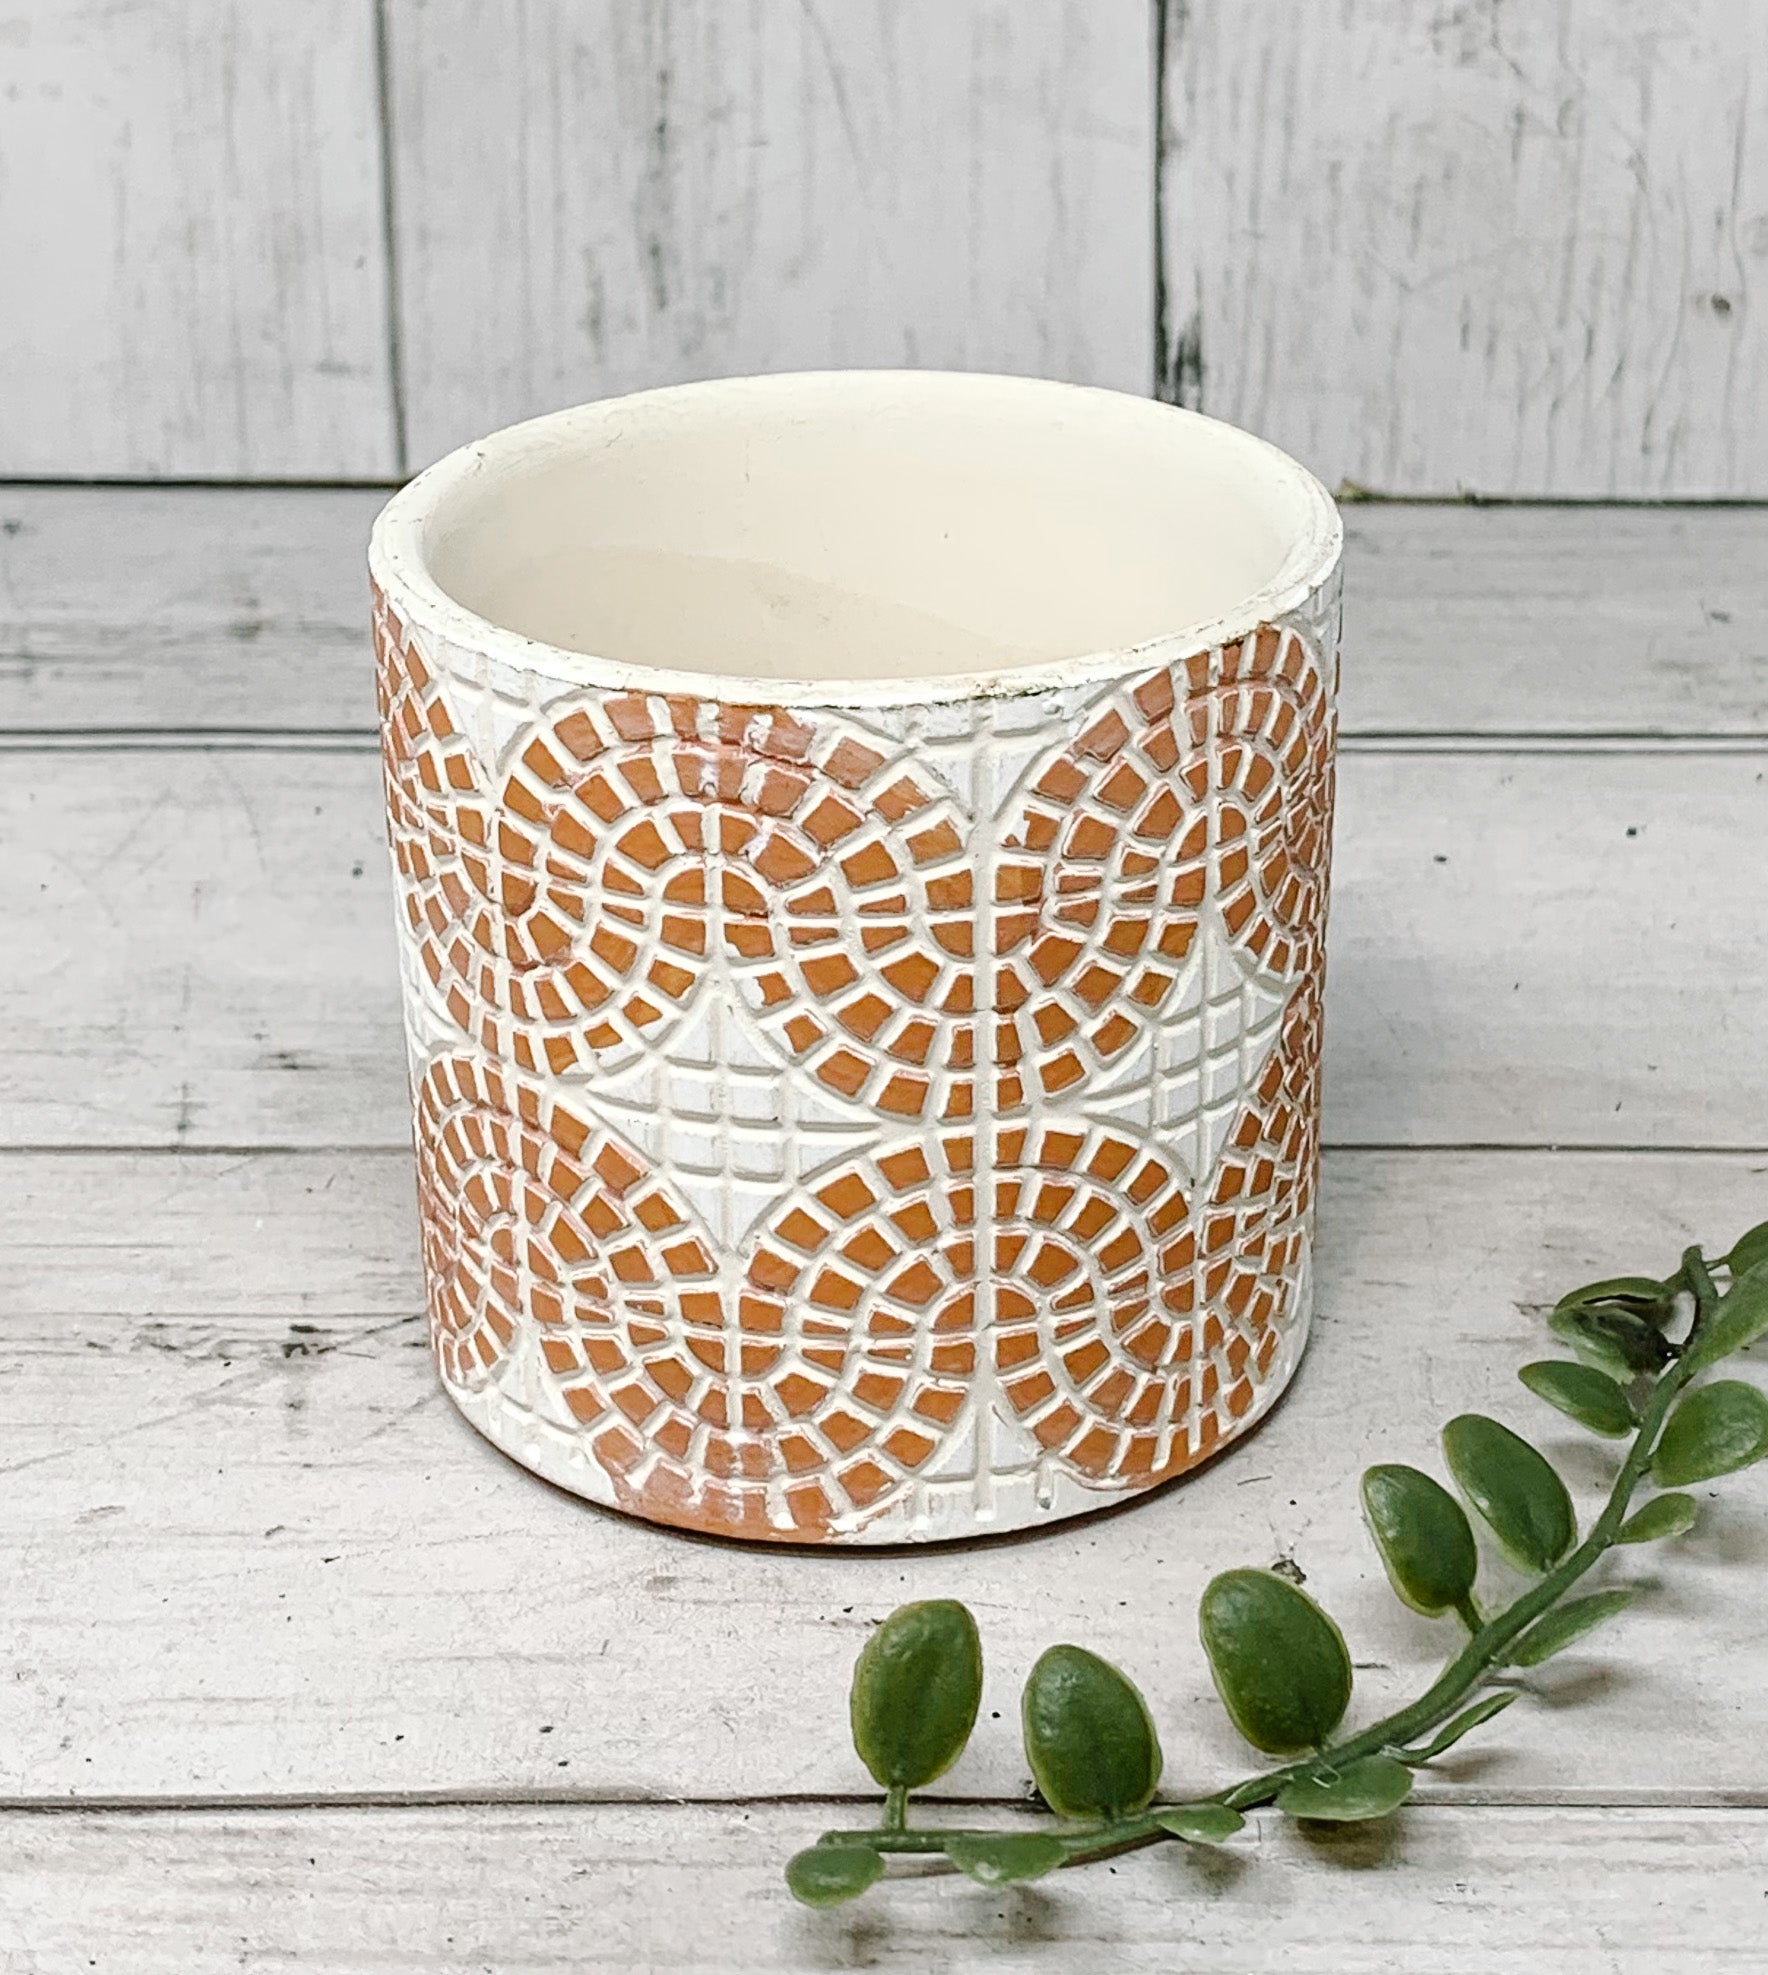 Coral and White Mosaic Ceramic Flower Pot